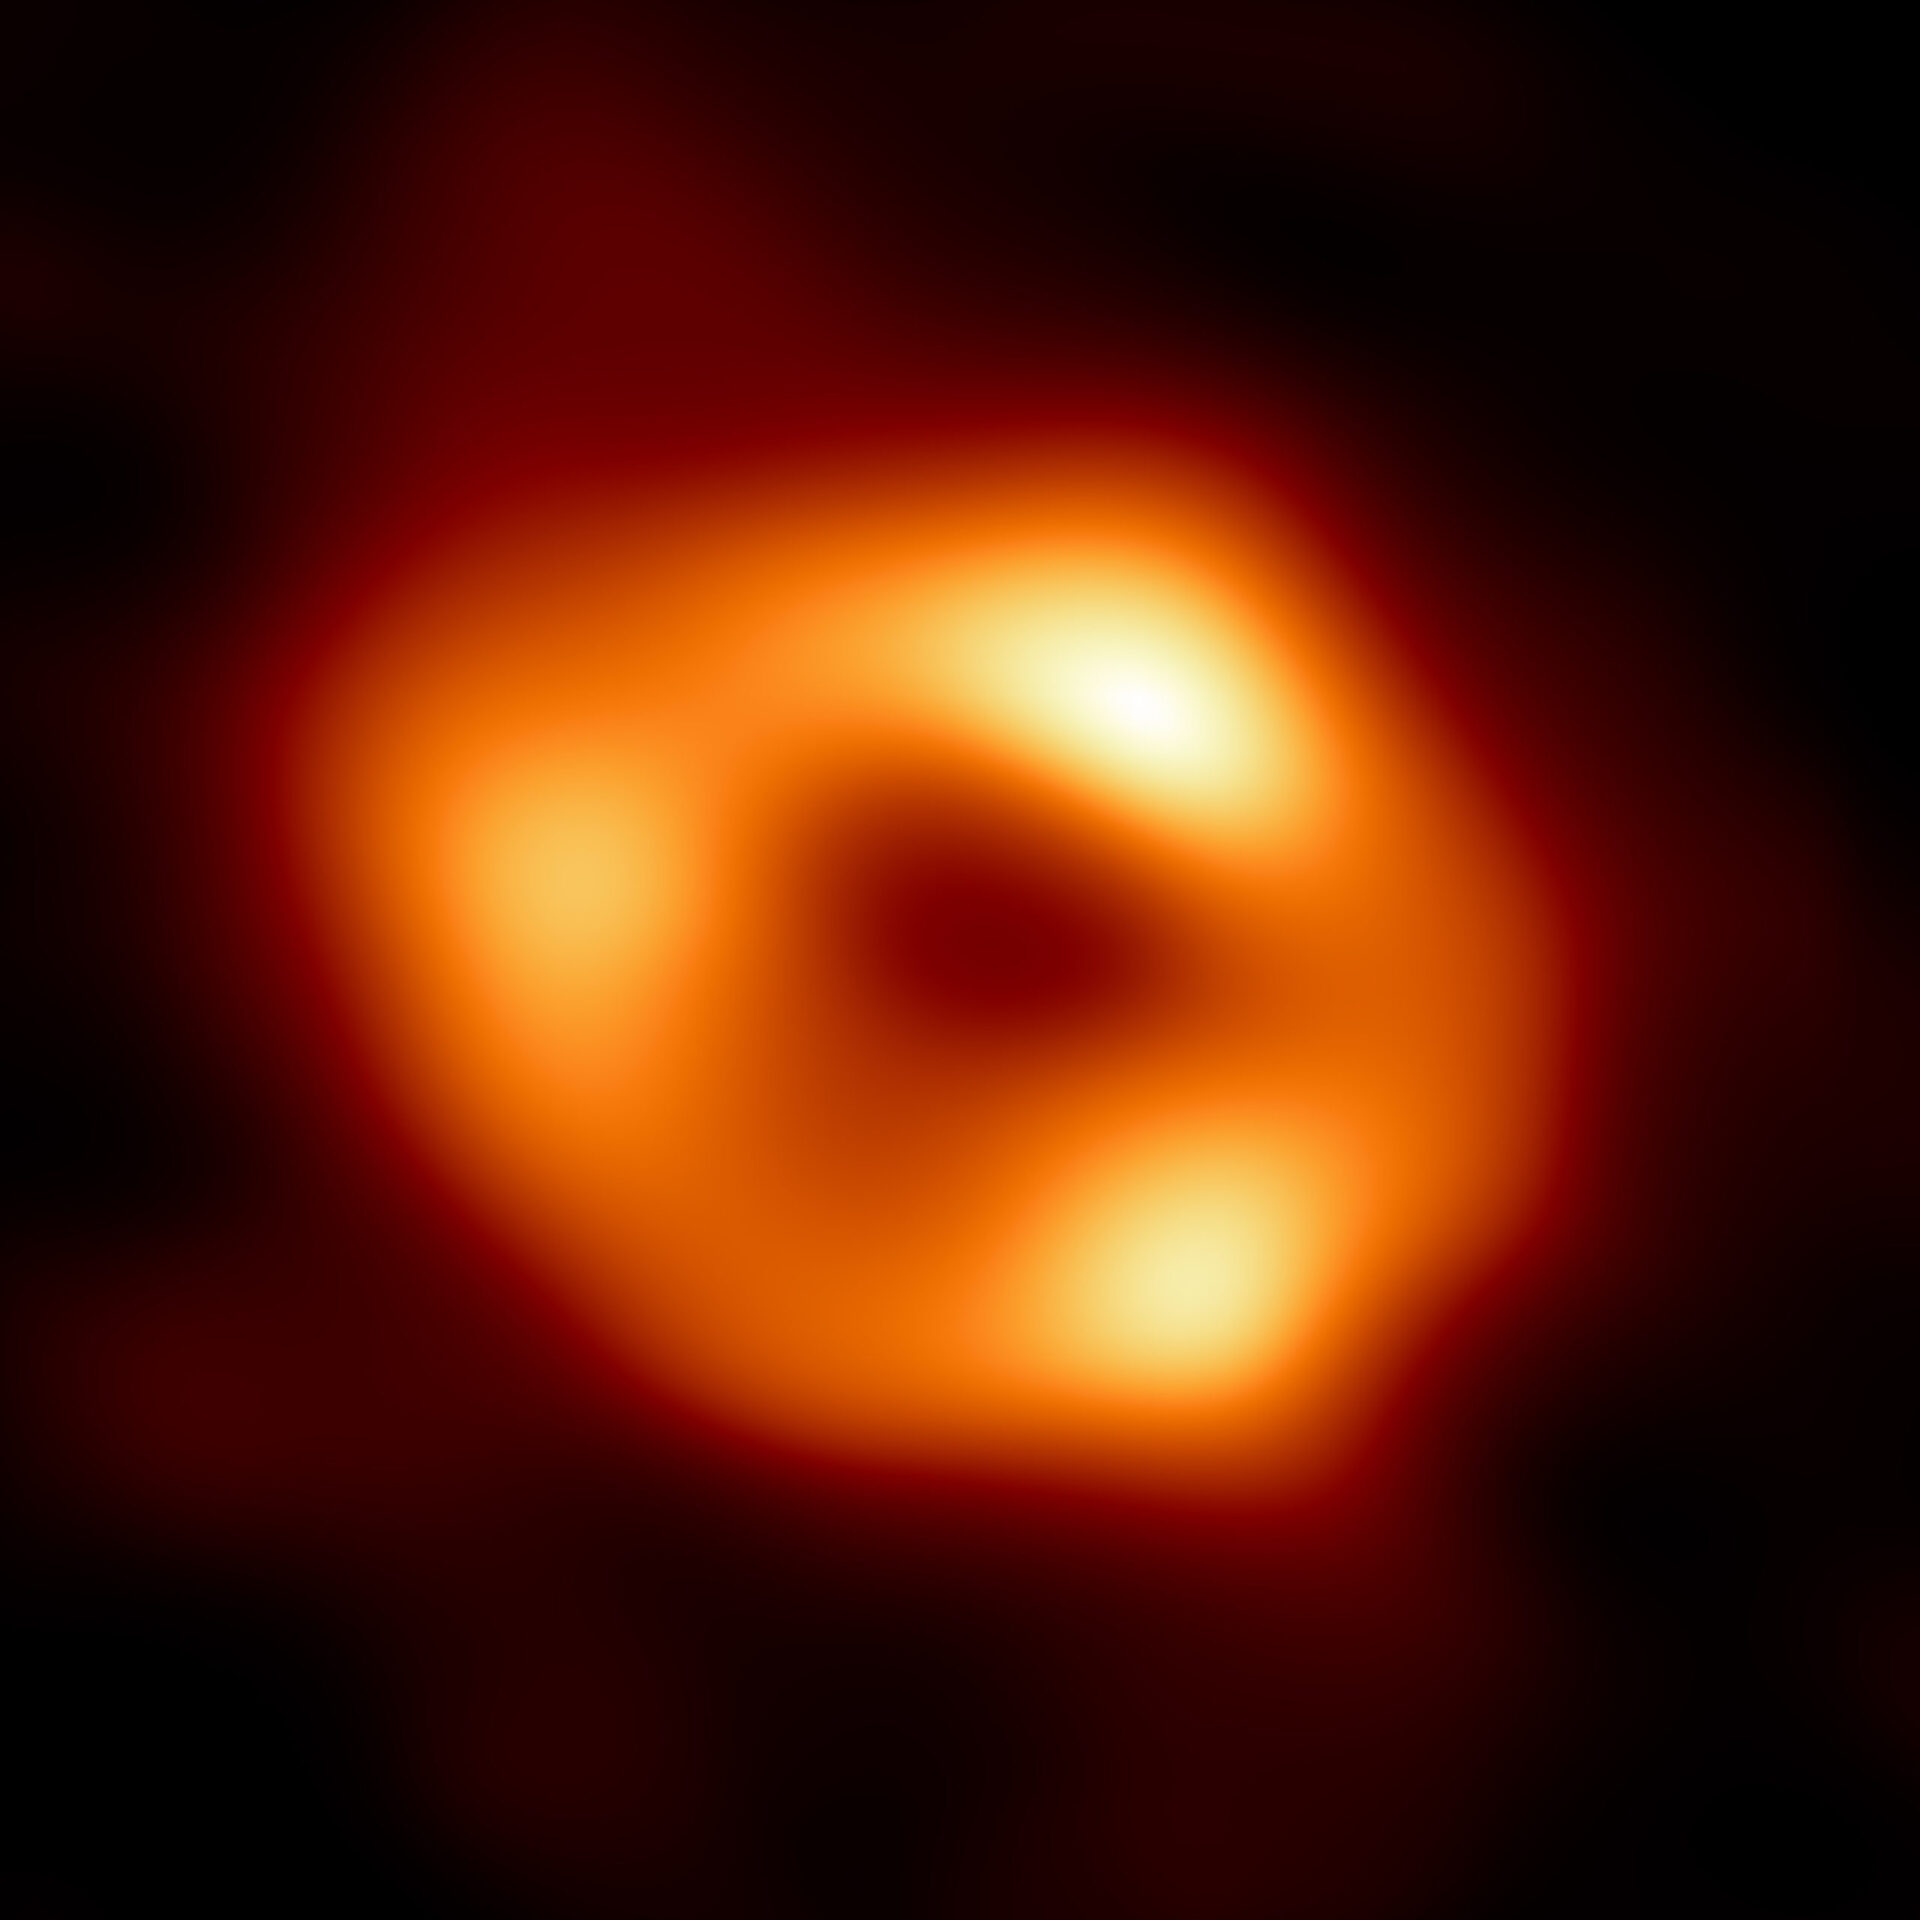 <p>This is the first image of Sagittarius A* (or Sgr A* for short), the supermassive black hole at the center of our galaxy. It’s the first direct visual evidence of the presence of this black hole. It was captured by the Event Horizon Telescope (EHT), an array which linked together eight existing radio observatories across the planet to form a single “Earth-sized” virtual telescope. The telescope is named after the “event horizon”, the boundary of the black hole beyond which no light can escape.<br />
Although we cannot see the event horizon itself, because it cannot emit light, glowing gas orbiting around the black hole reveals a telltale signature: a dark central region (called a “shadow”) surrounded by a bright ring-like structure. The new view captures light bent by the powerful gravity of the black hole, which is four million times more massive than our Sun. The image of the Sgr A* black hole is an average of the different images the EHT Collaboration has extracted from its 2017 observations.<br />
Credit: EHT Collaboration</p>
